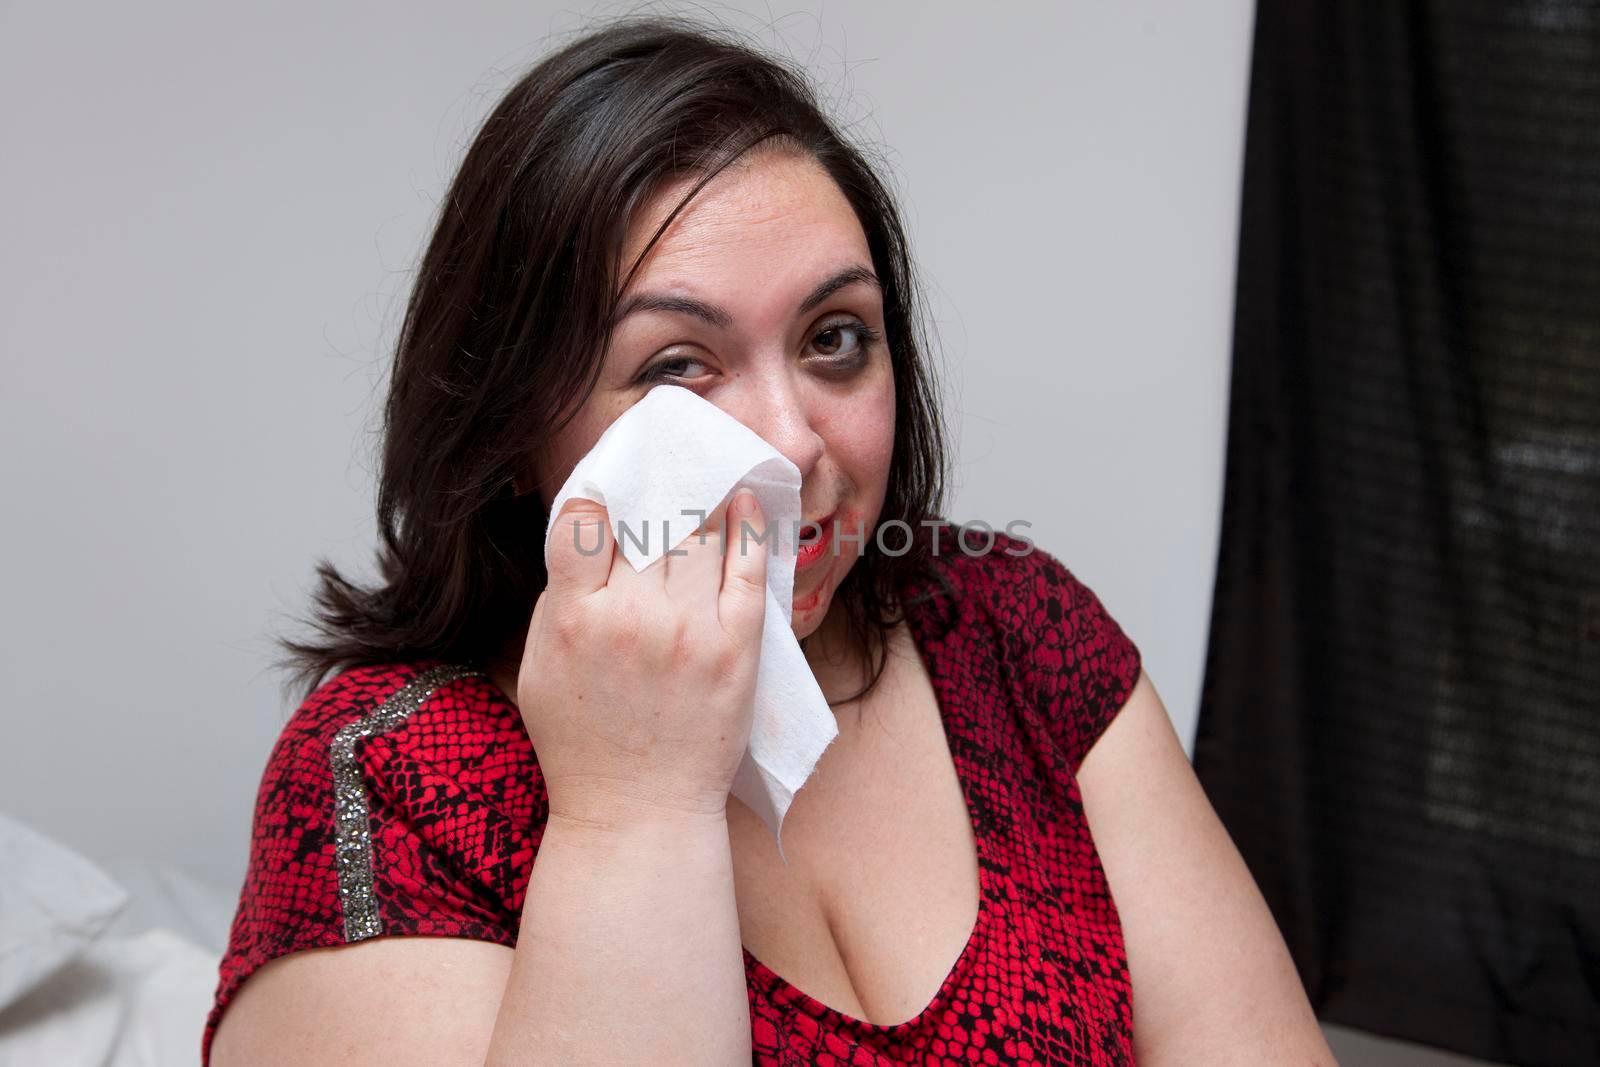 Smudged mascara and lipstick on a person's face as they wipe it clean with a tissue